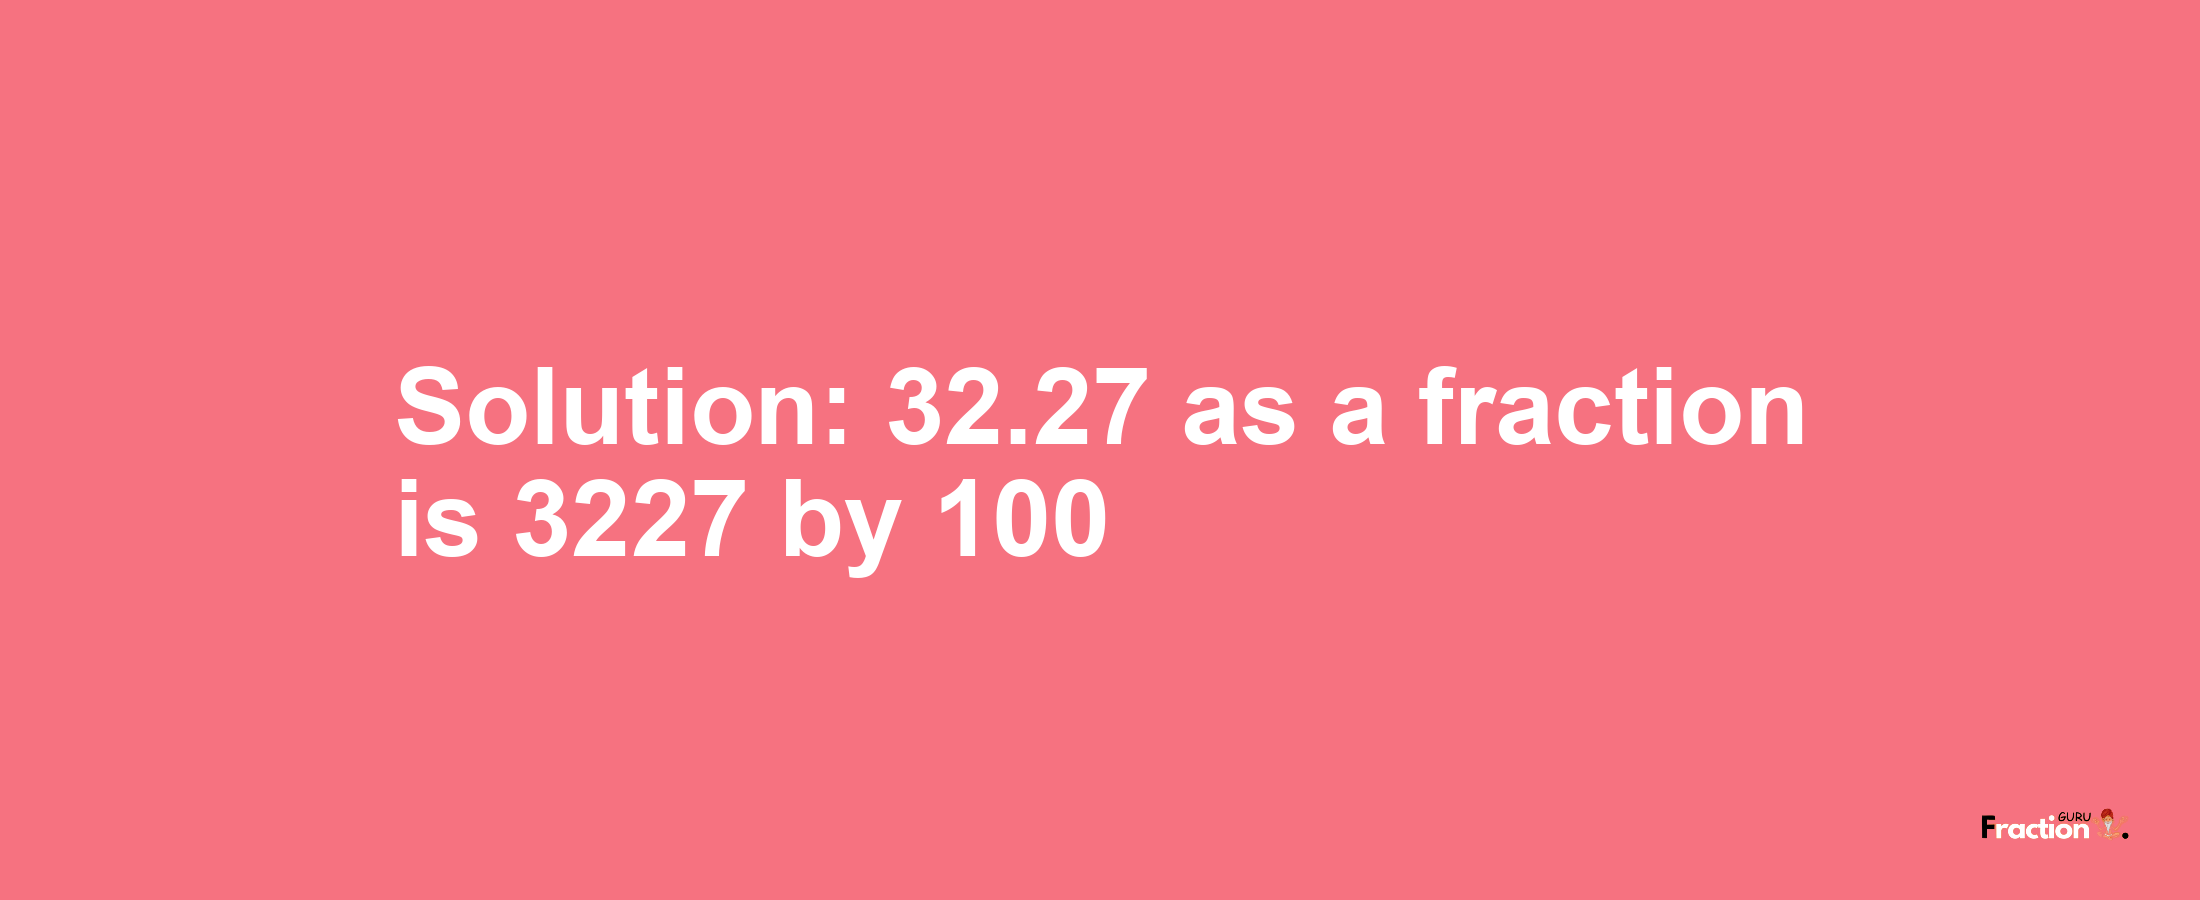 Solution:32.27 as a fraction is 3227/100